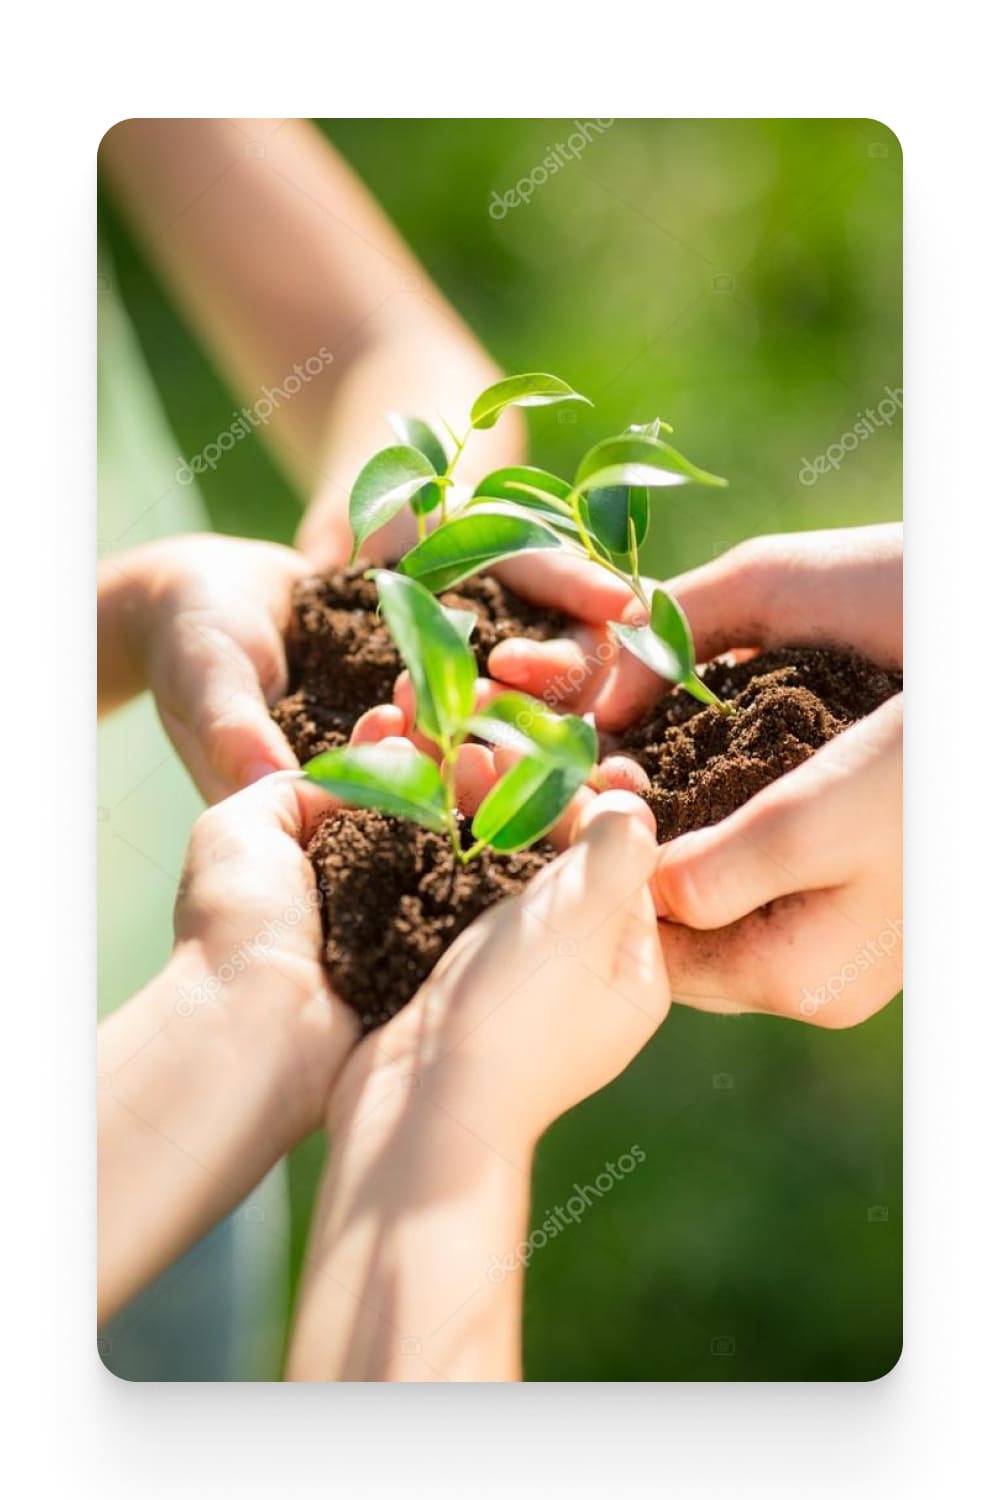 Children holding young plant in hands.